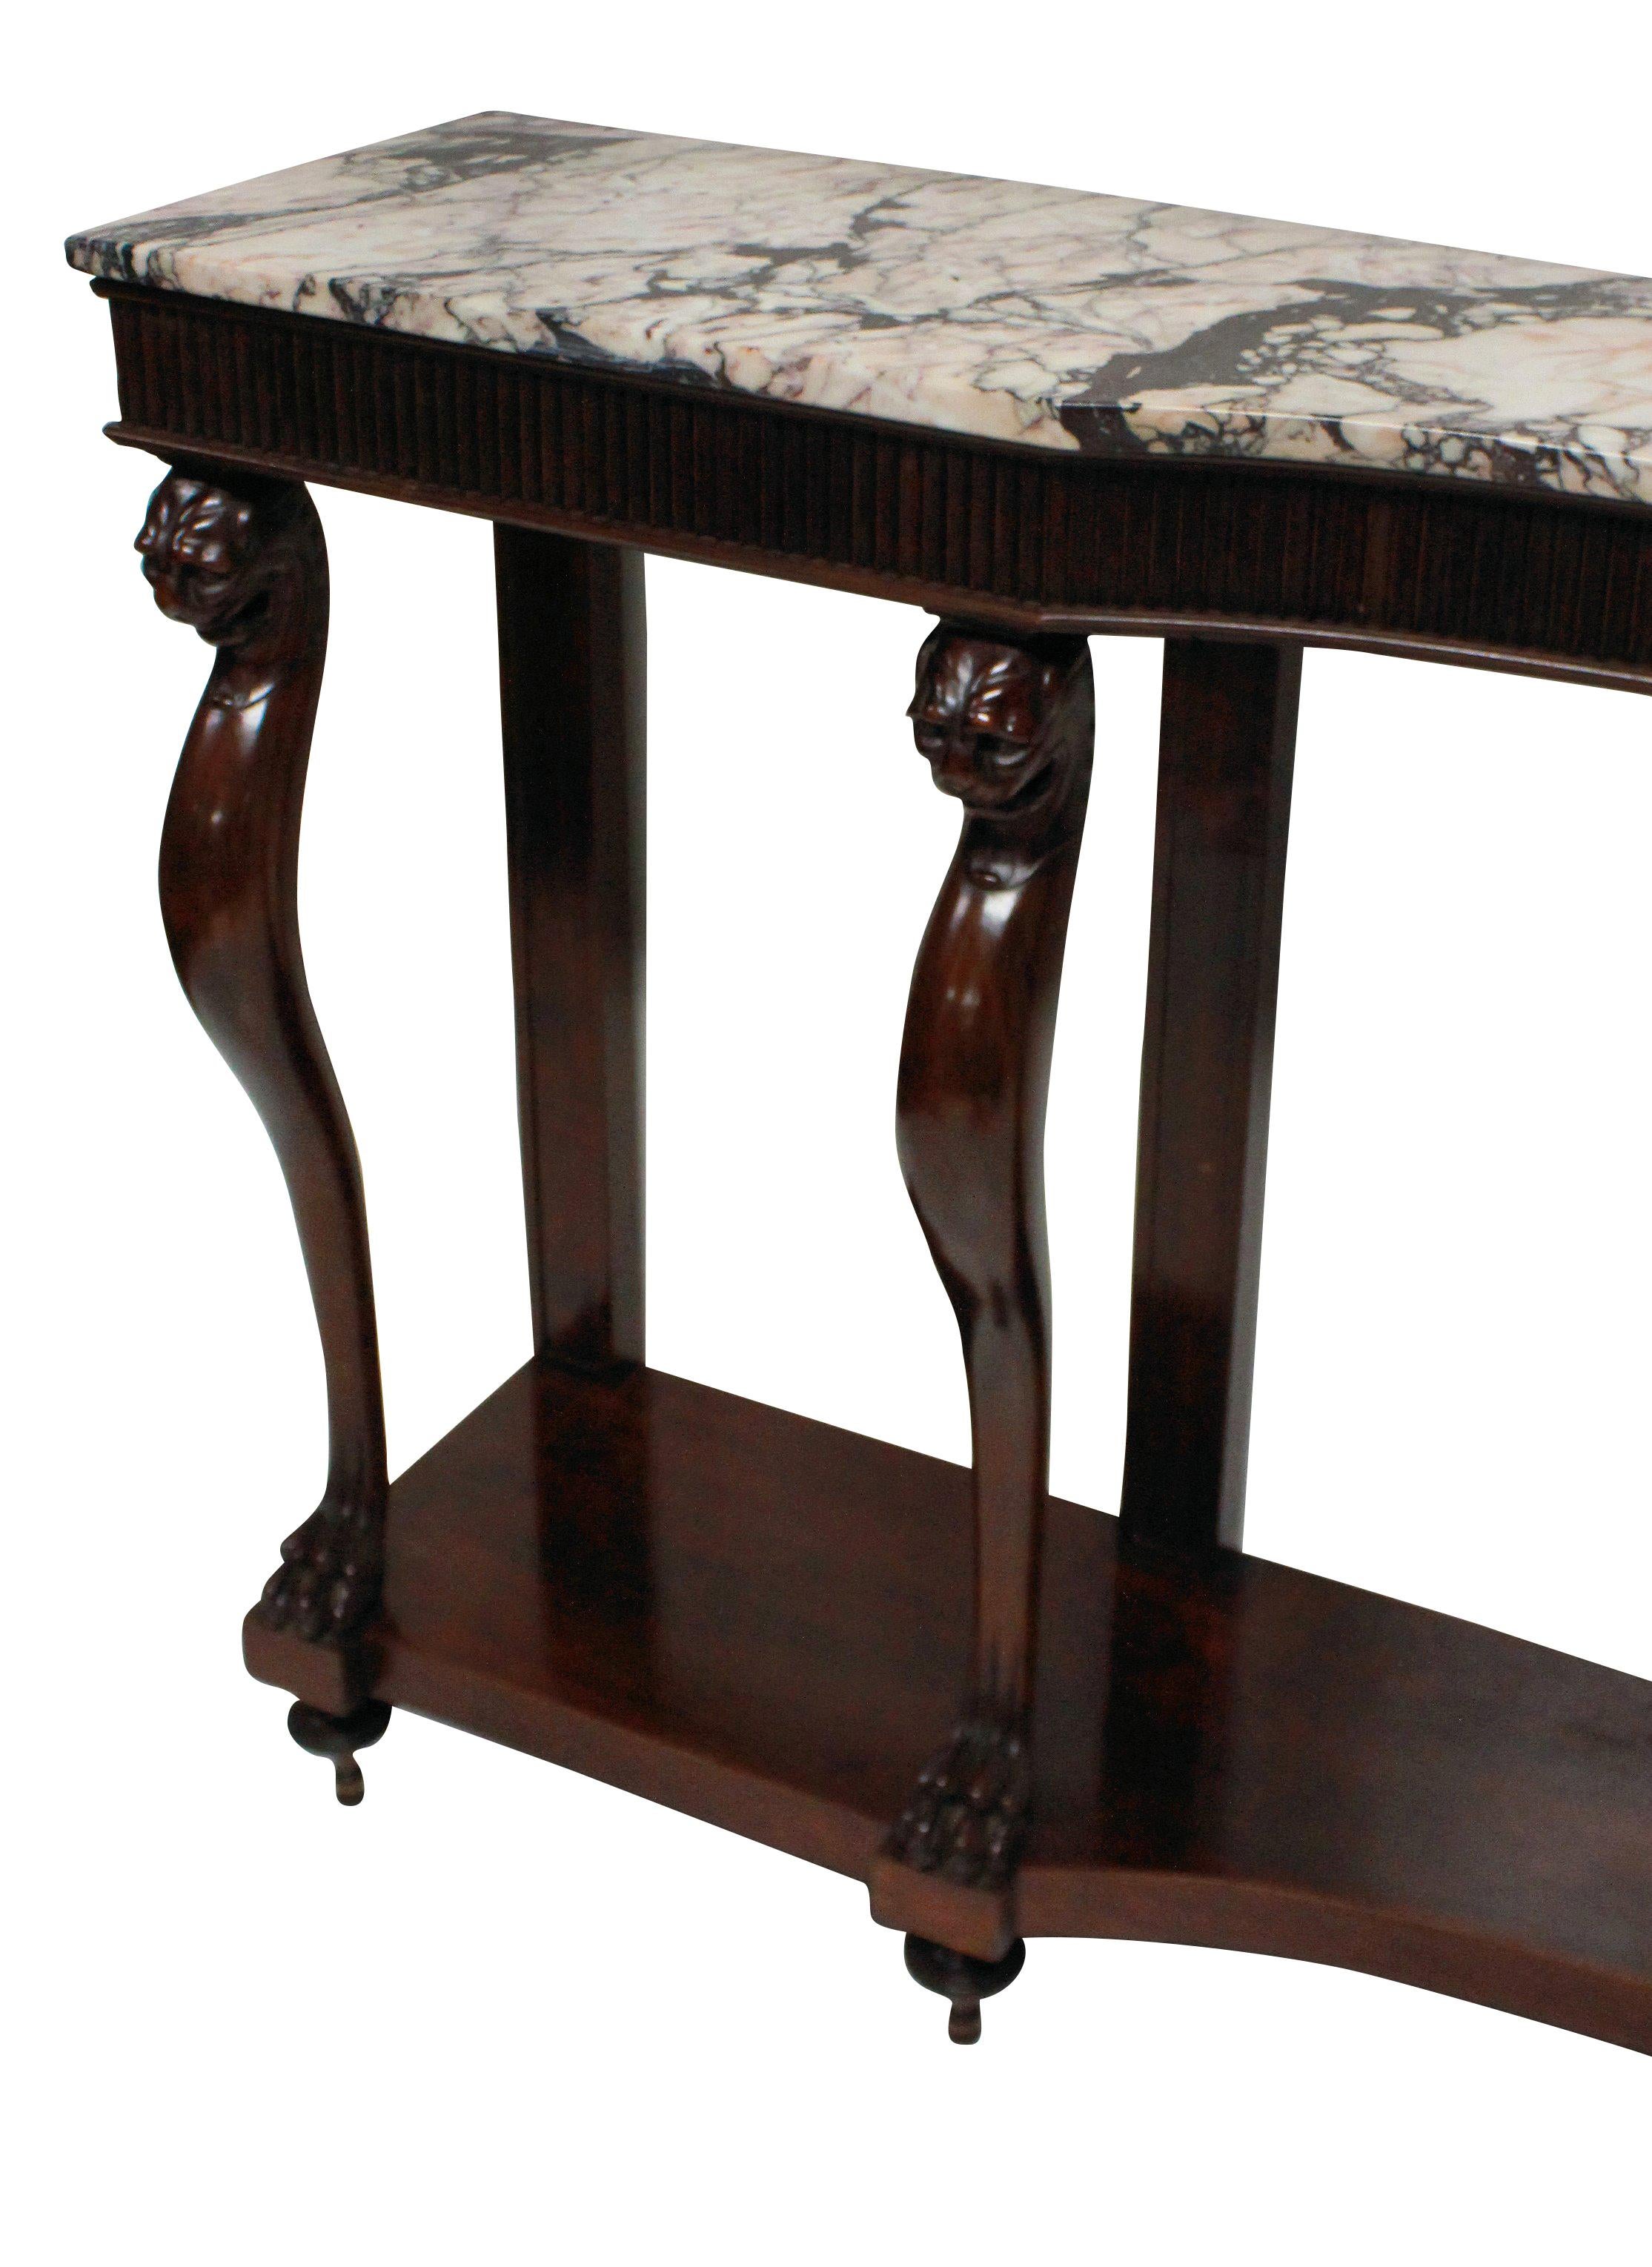 Monumental Italian Neoclassical Marble-Top Console Table 1